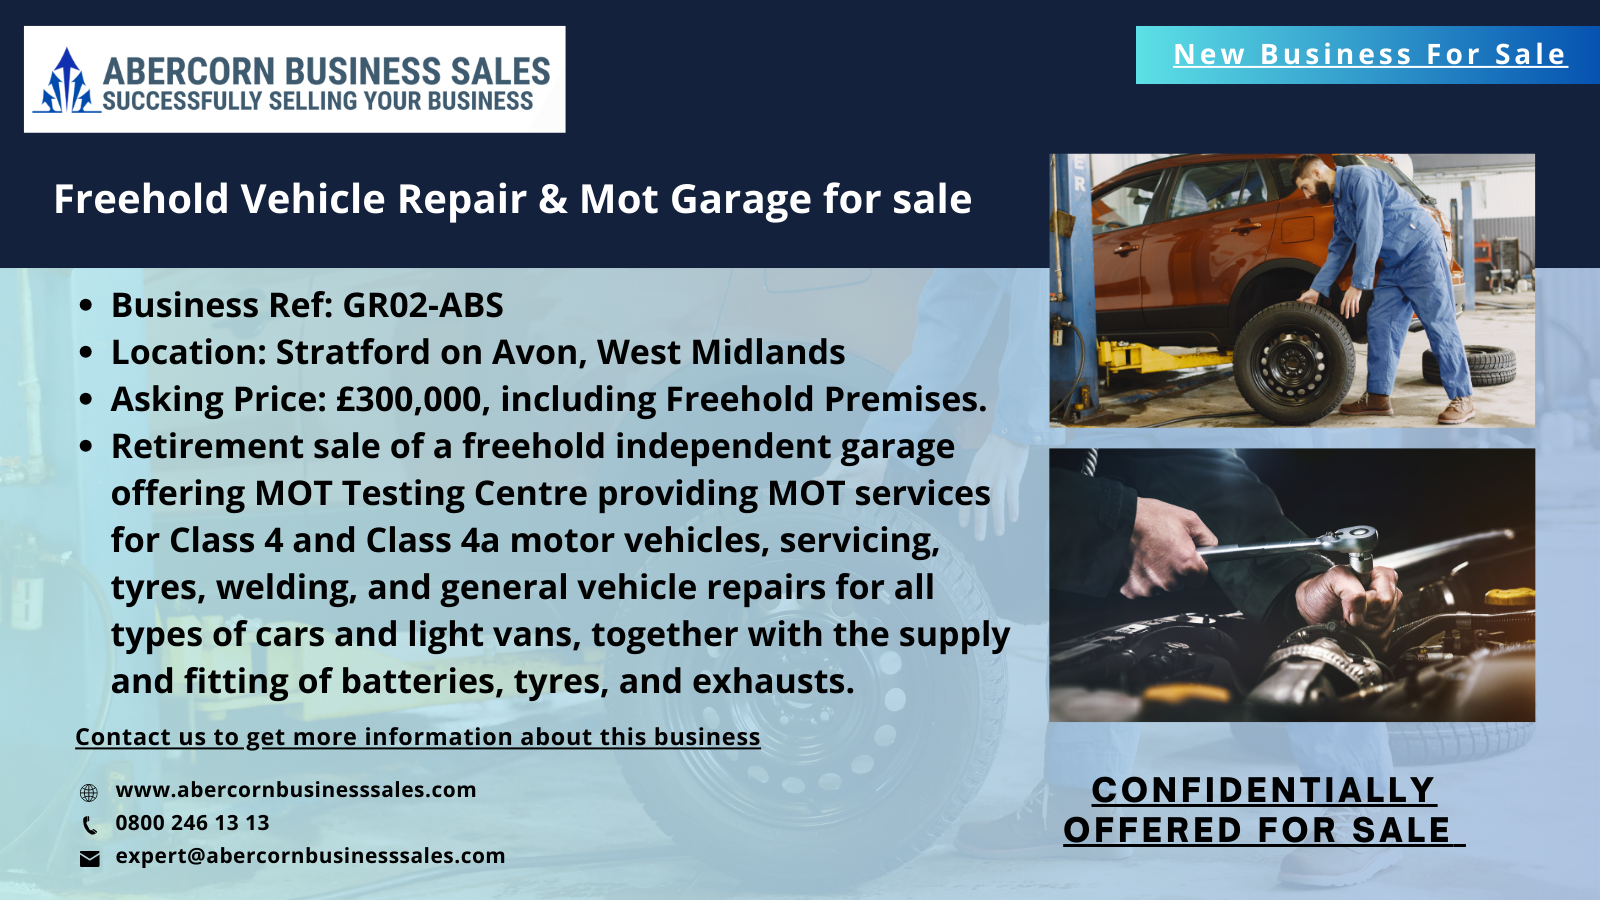 GR02-ABS - Freehold Vehicle Repair & Mot Garage for Sale